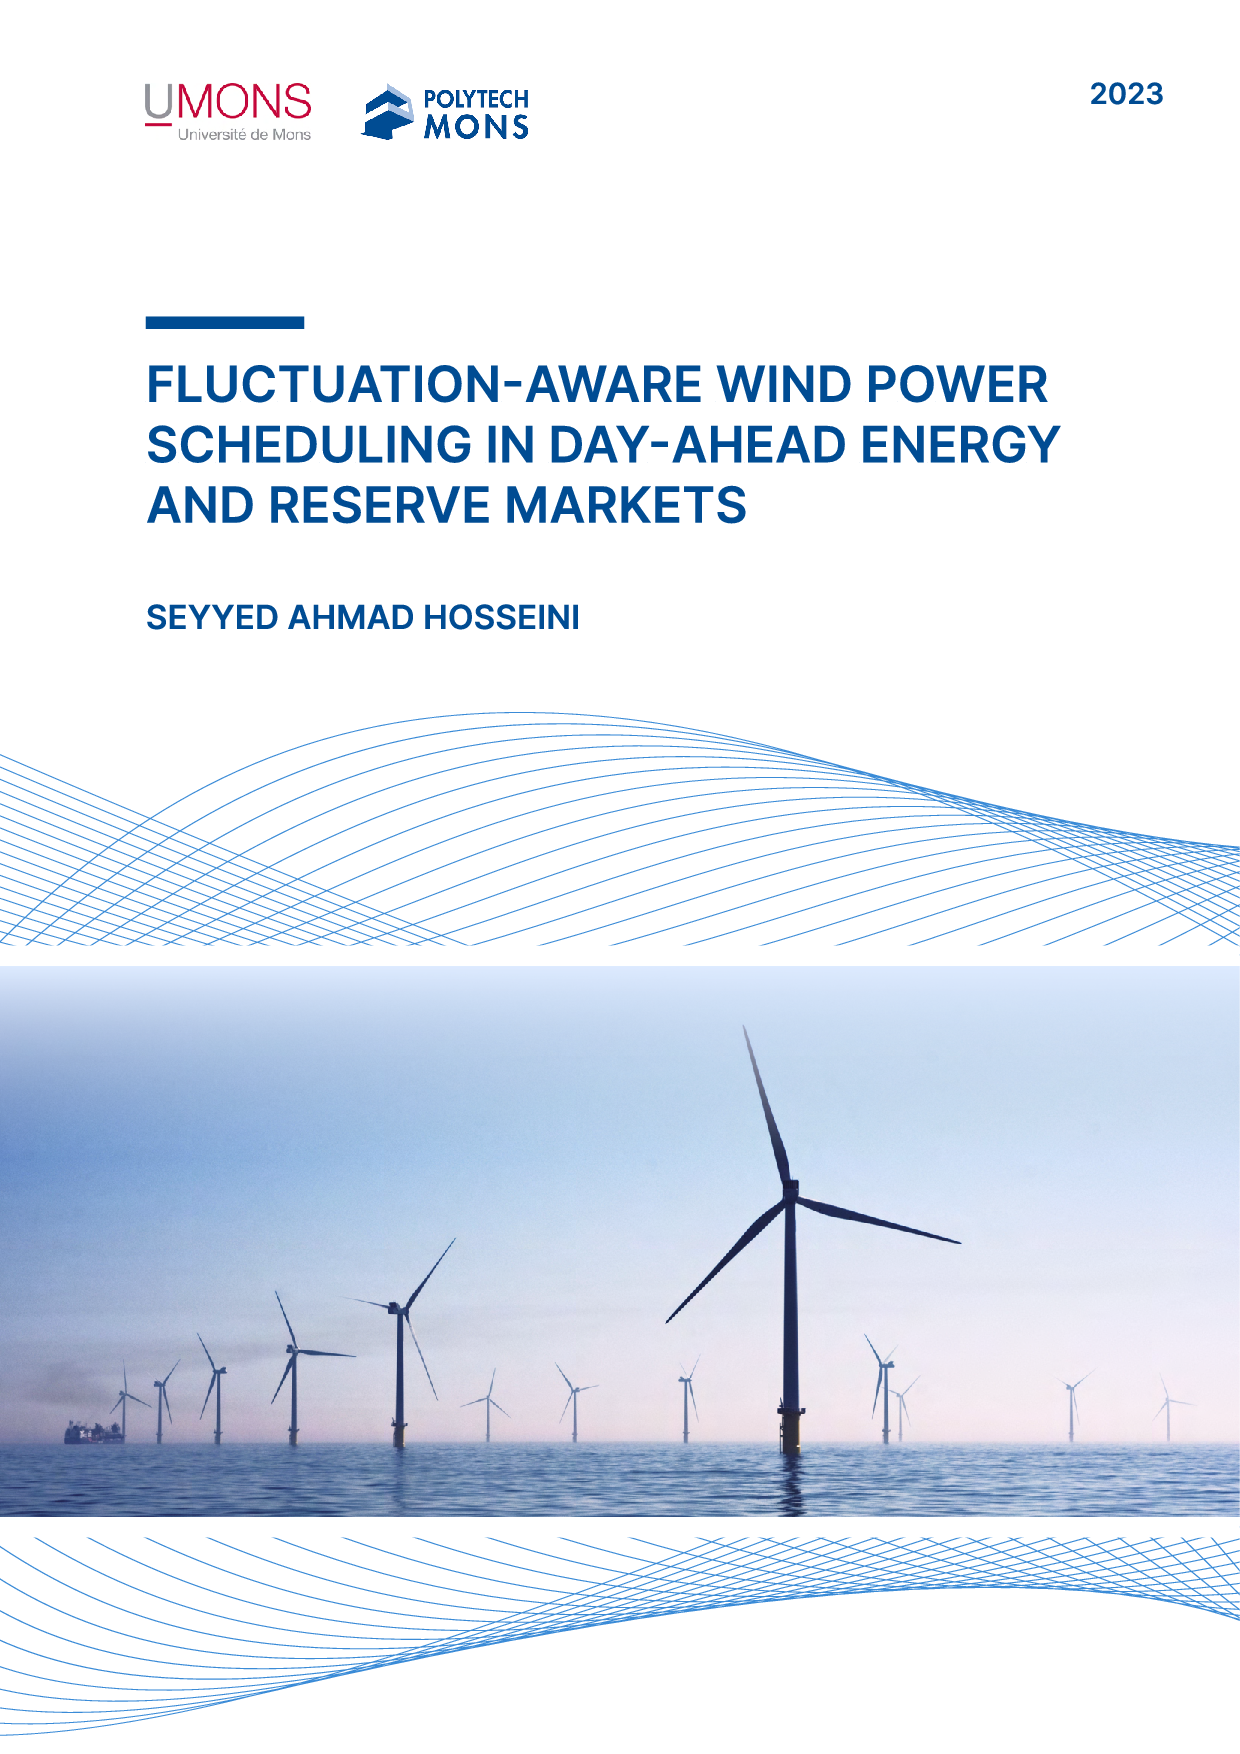 Fluctuation-Aware Wind Power Scheduling in Day-ahead Energy and Reserve Markets